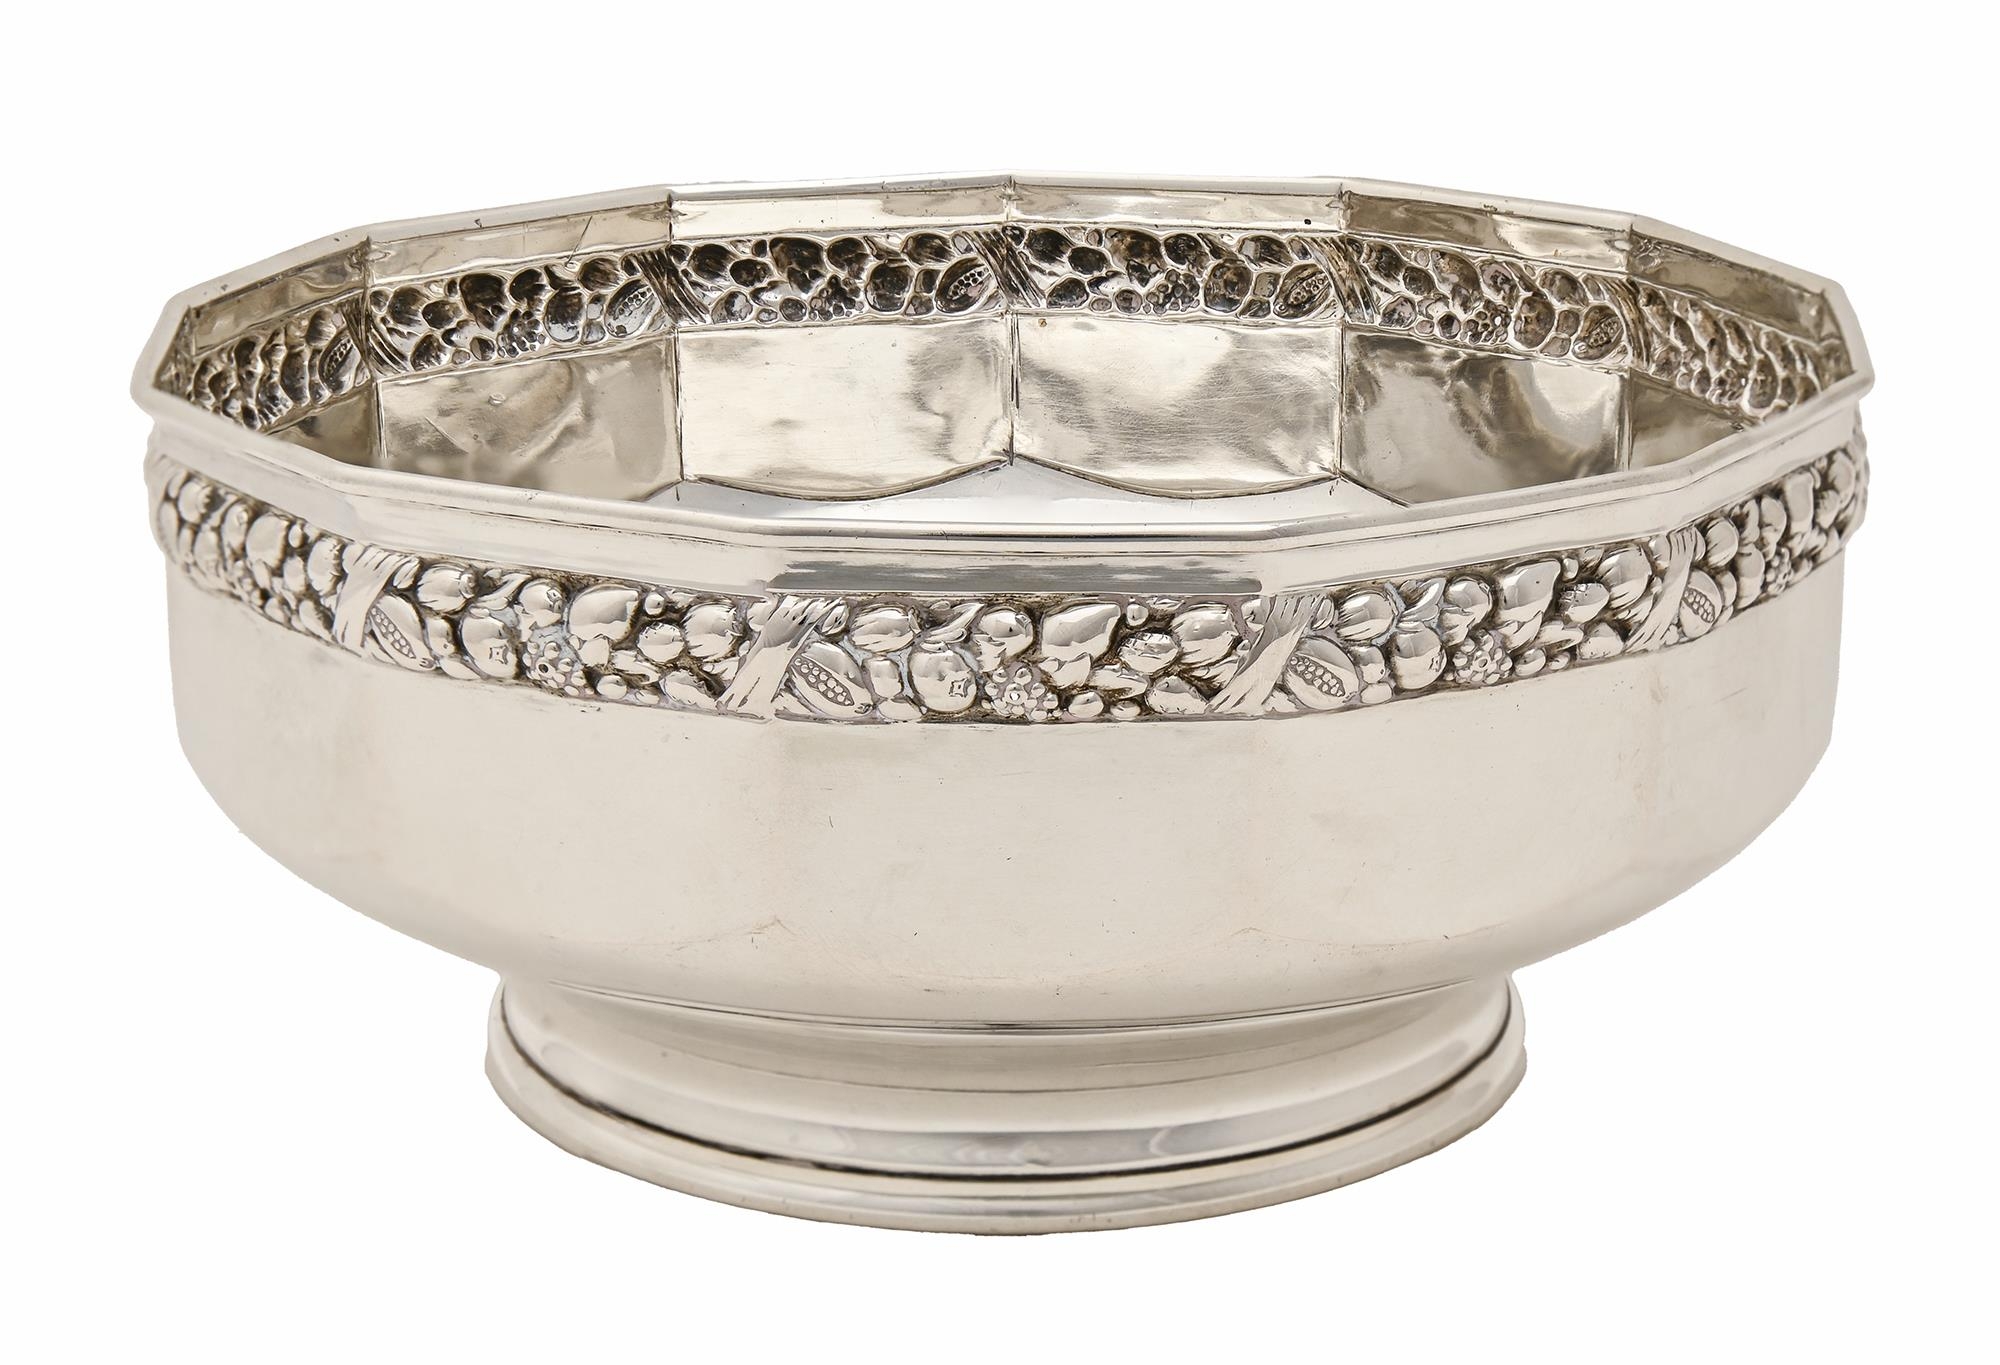 A German silver fruit bowl, early 20th c, 22cm diam, by L A Gundel, maker's and control marks and